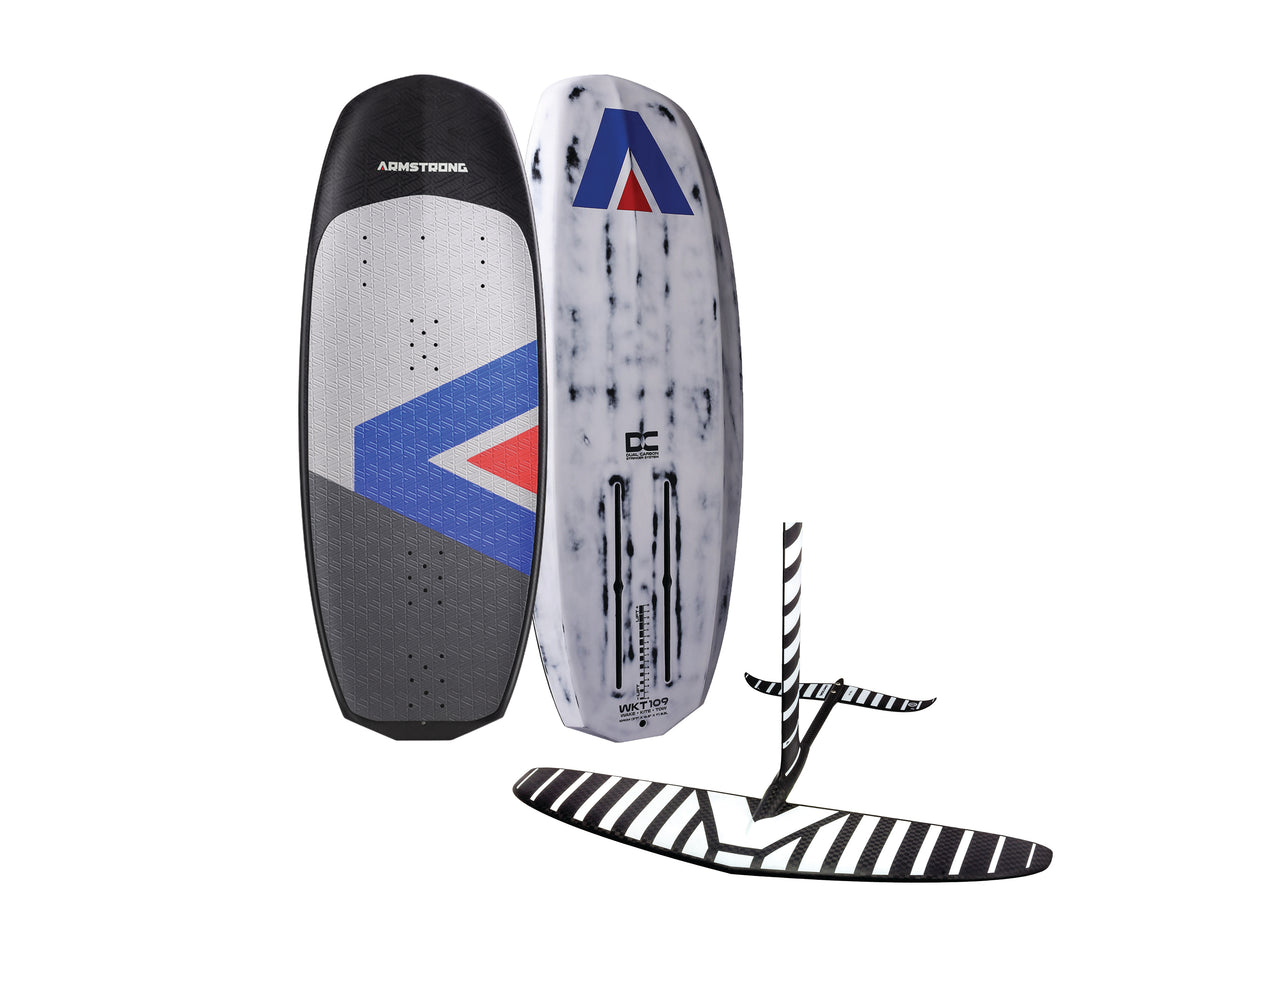 Armstrong Wakefoil Board W/ Armstrong HS1850 Foil Kit Package | 2023 | Pre-Order